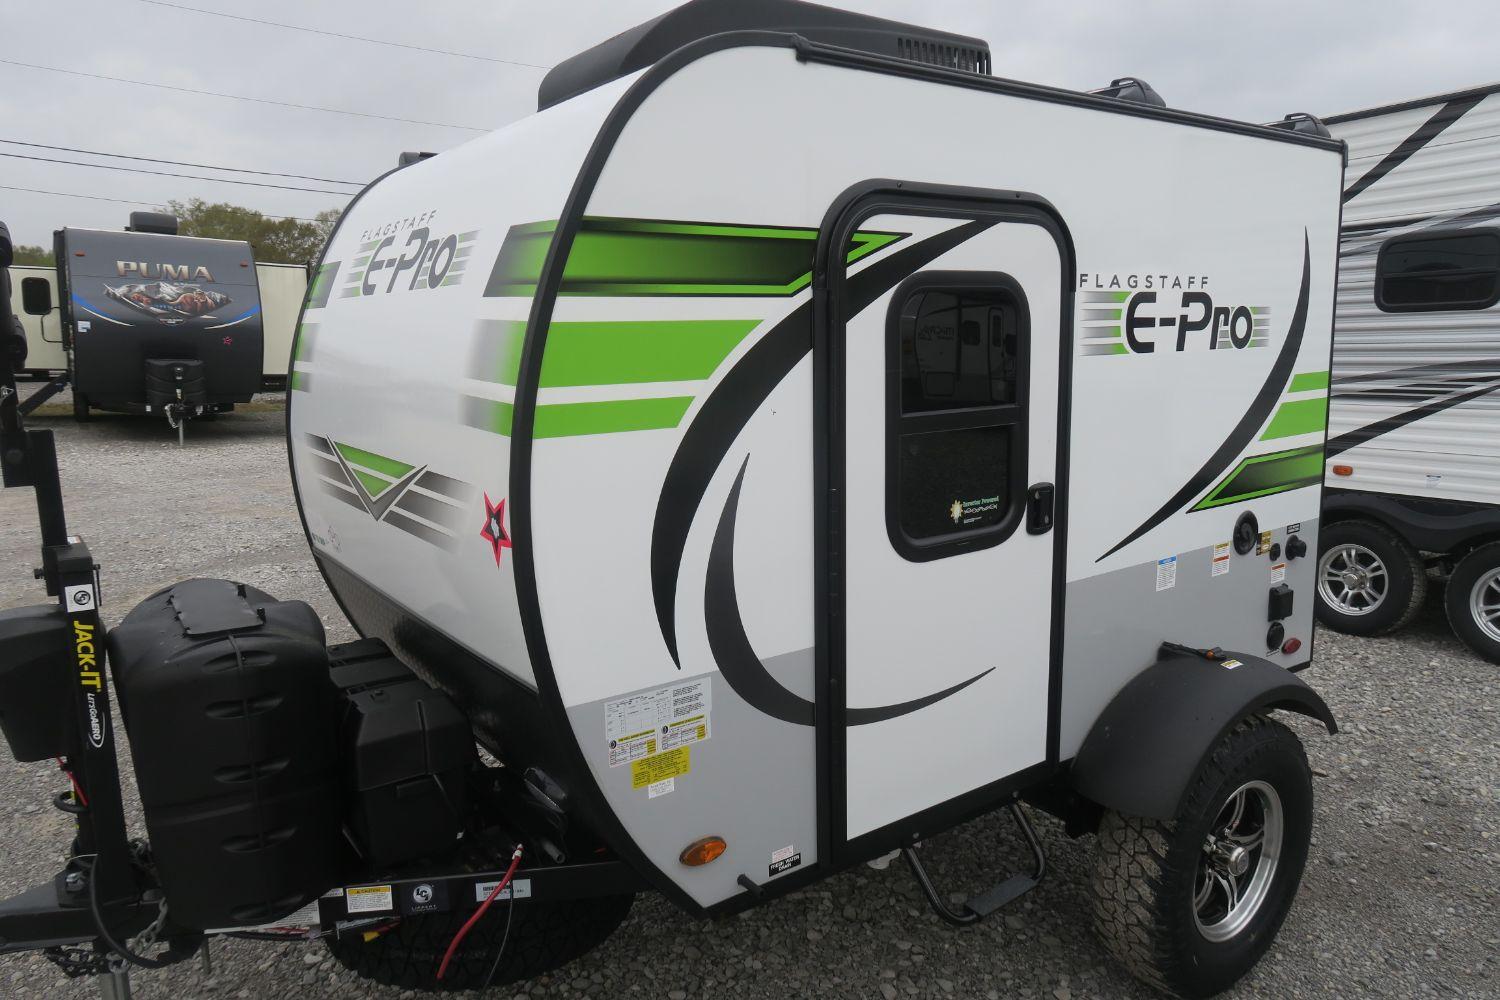 NEW 2020 FLAGSTAFF E-PRO 12RK - Overview | Berryland Campers